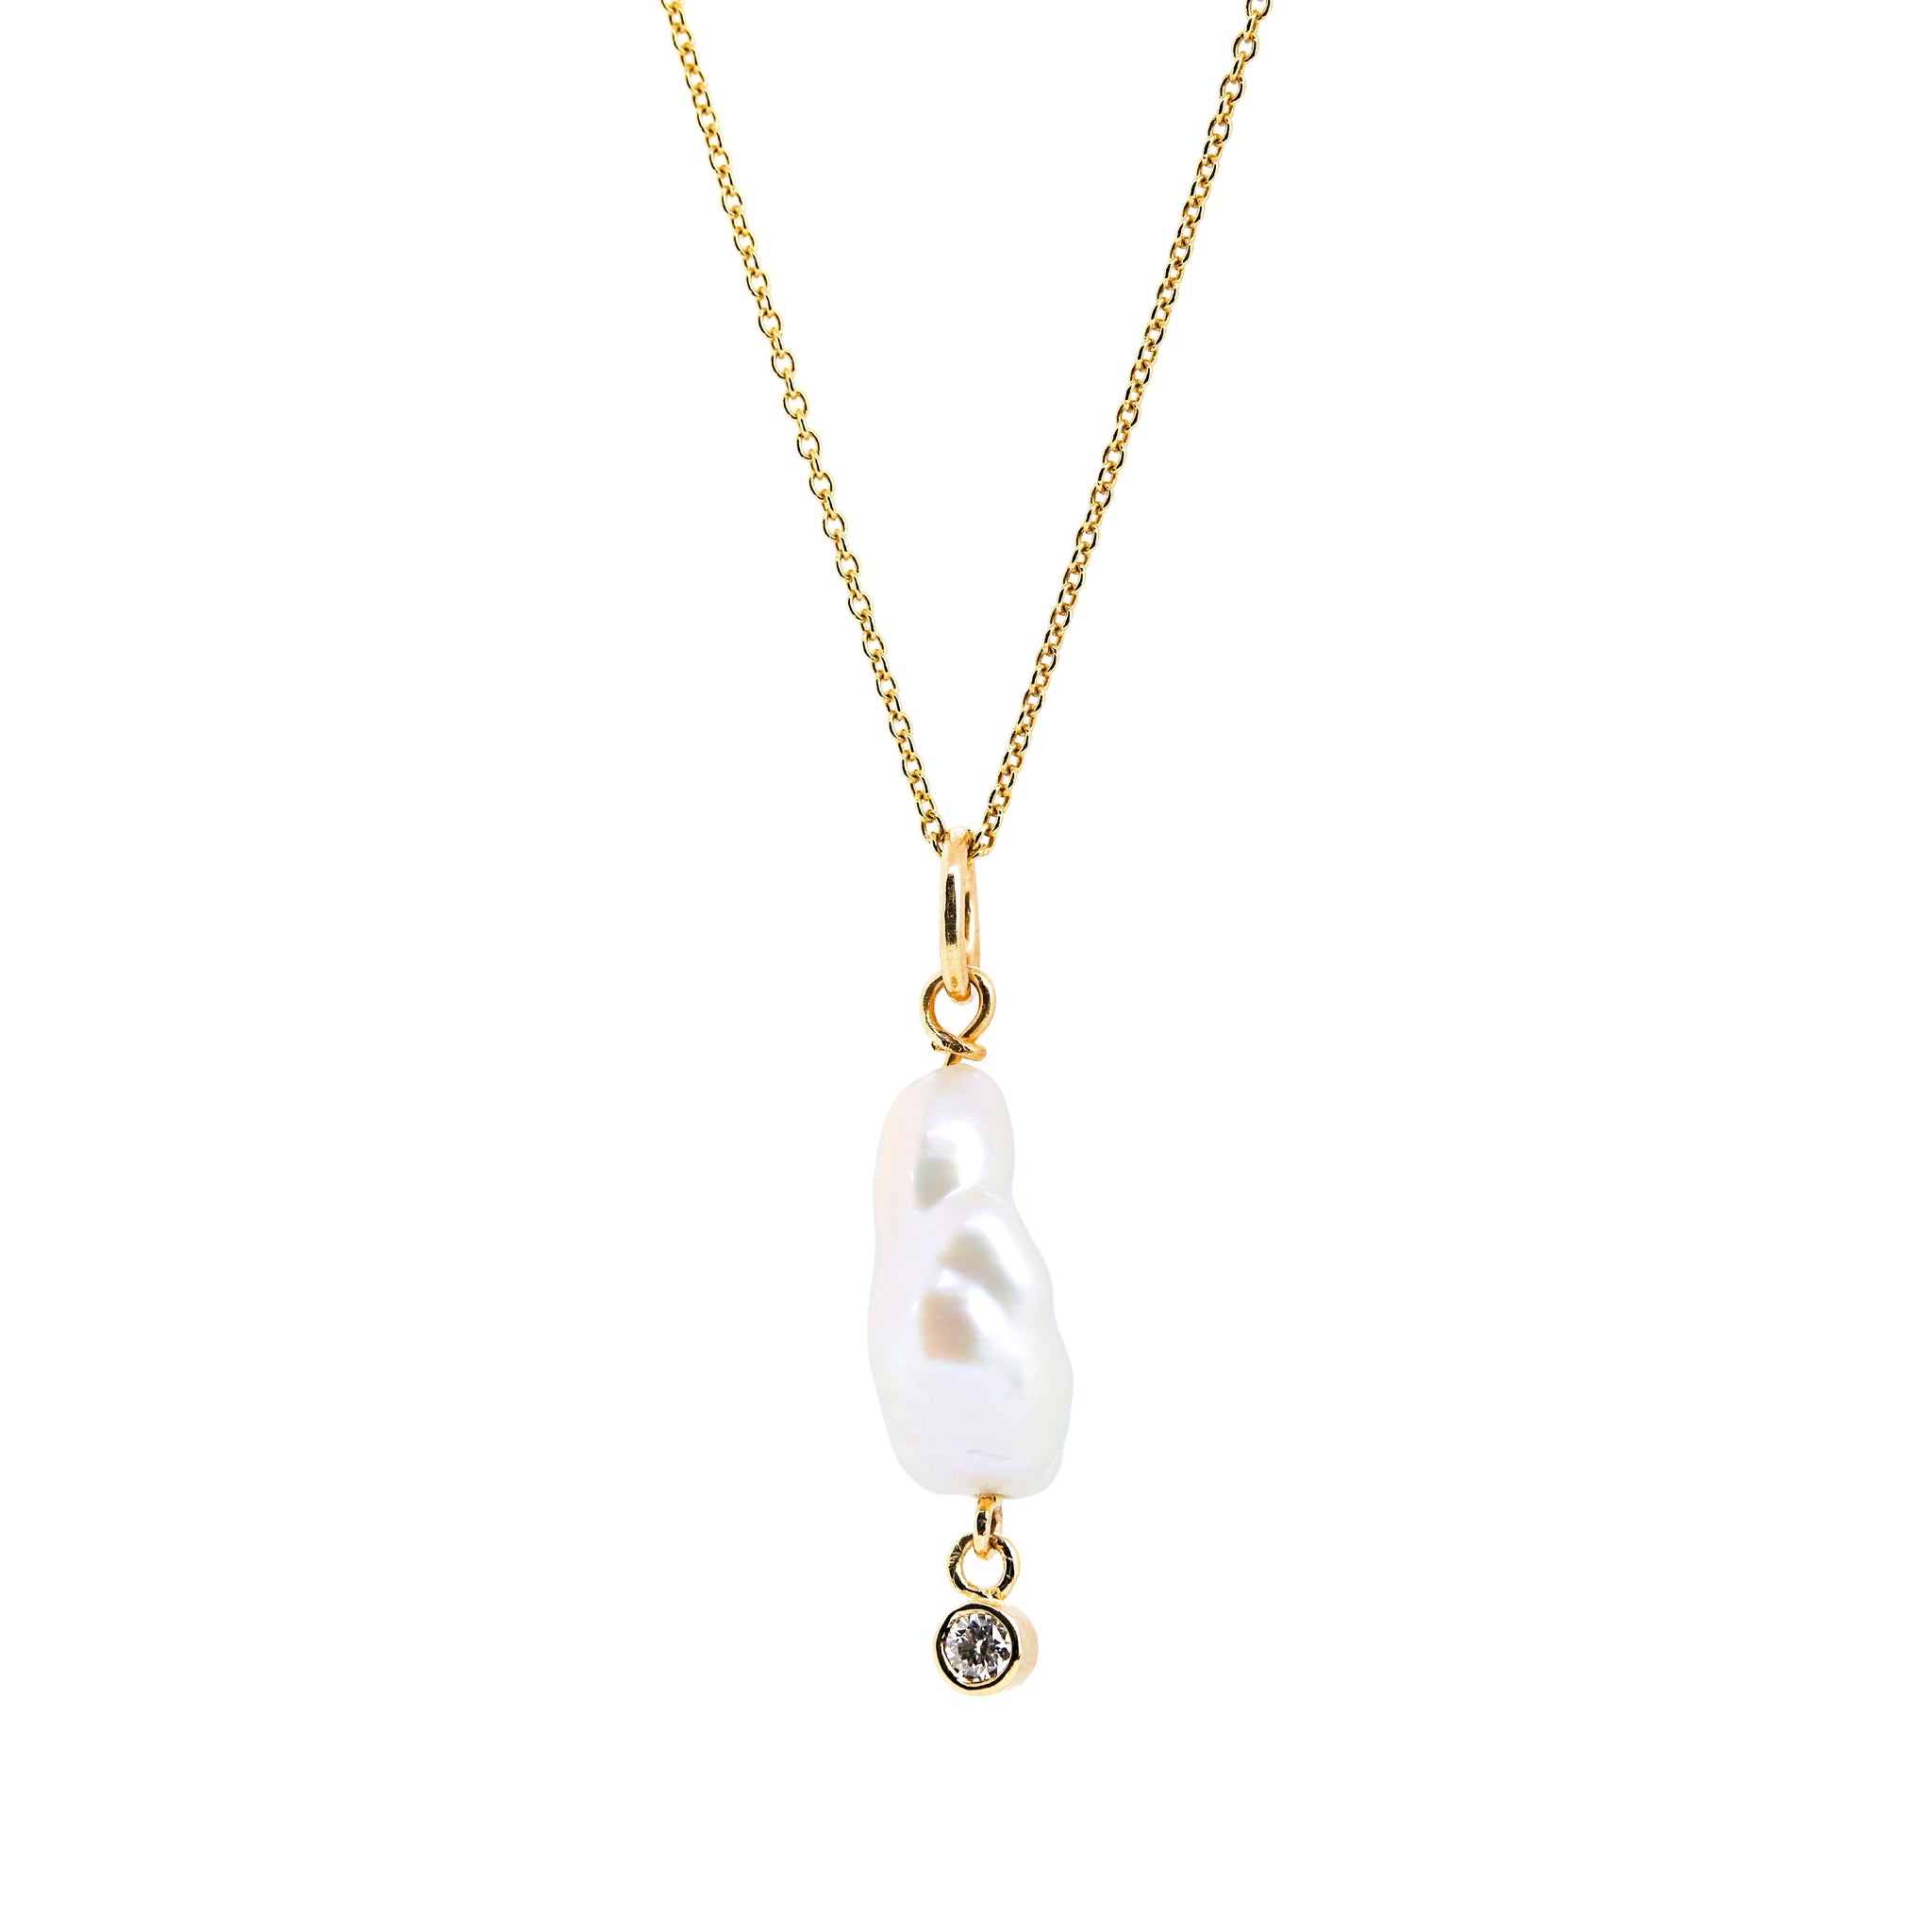 Pearl with Hanging Diamond Pendant / Necklace, Solid Gold